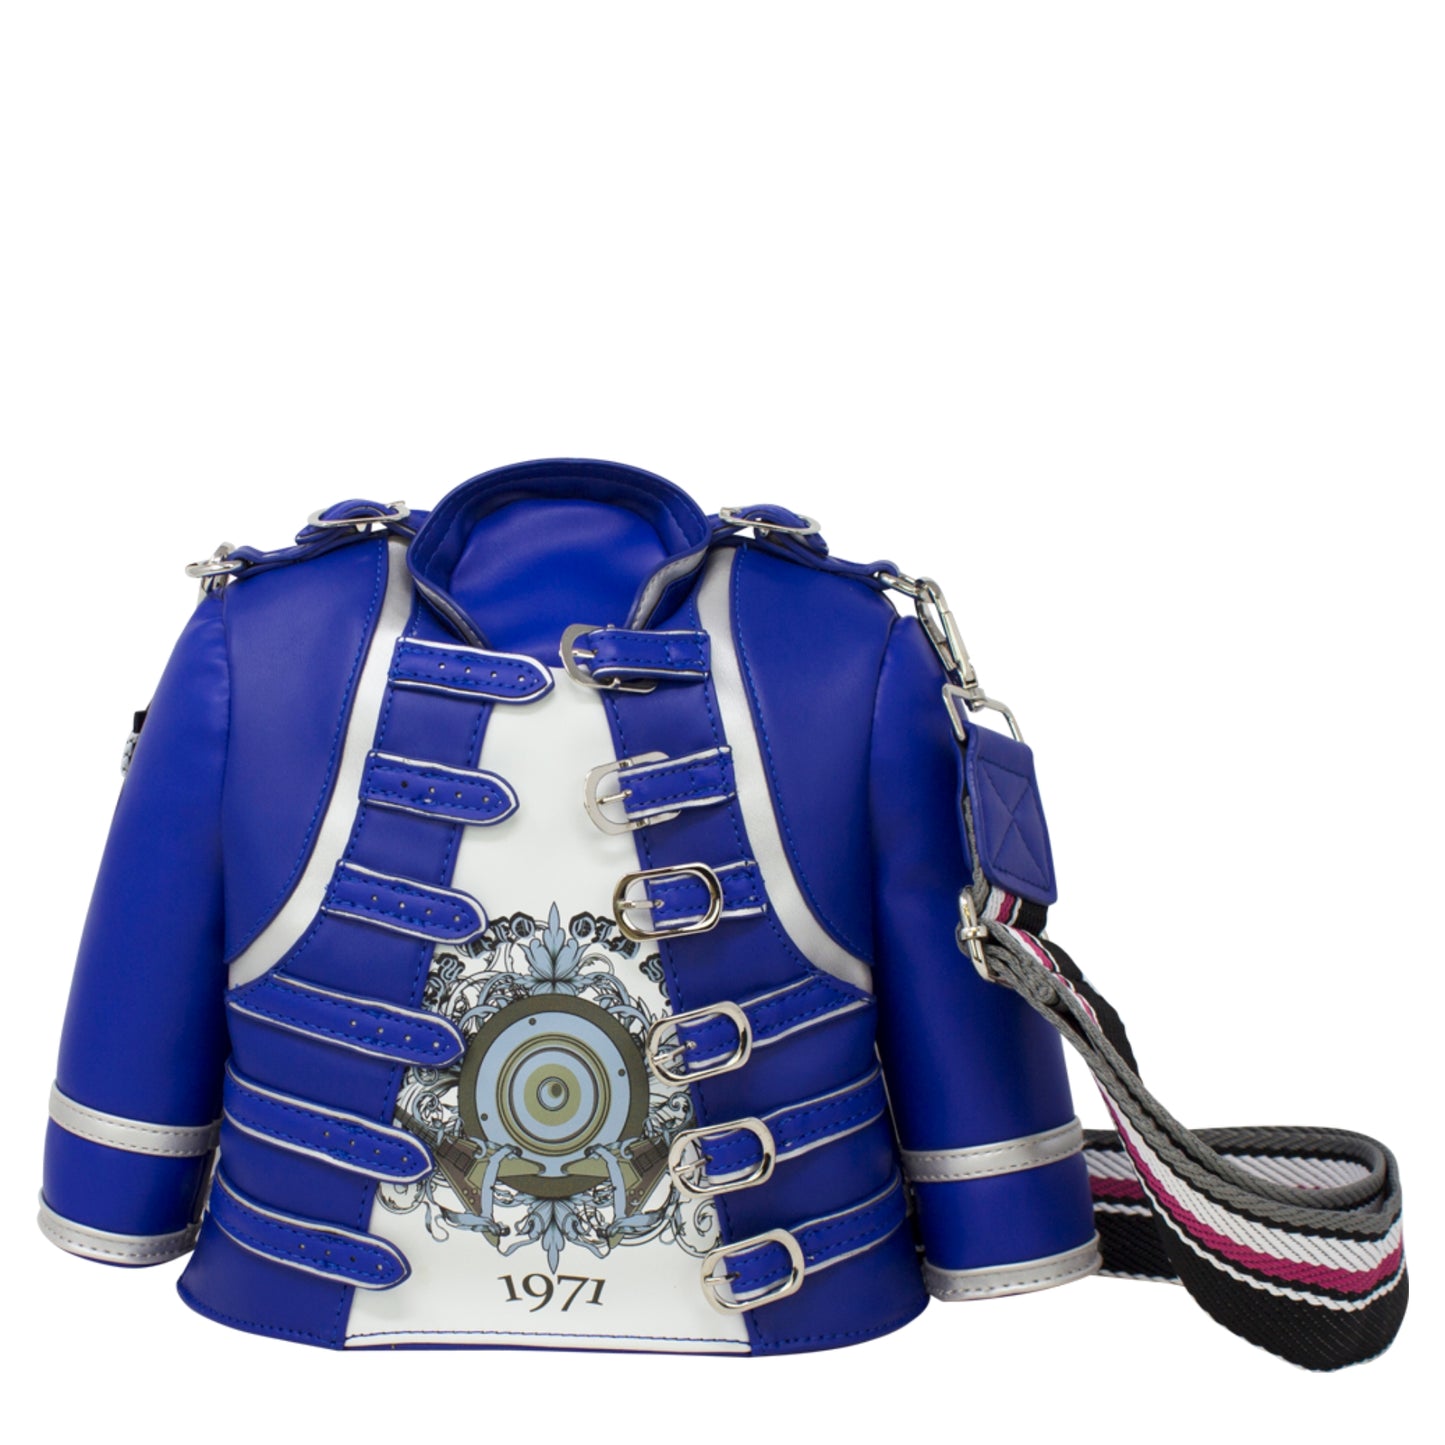 Blue Military-style tunic Inspired Rock n Roll Cross Body Bag